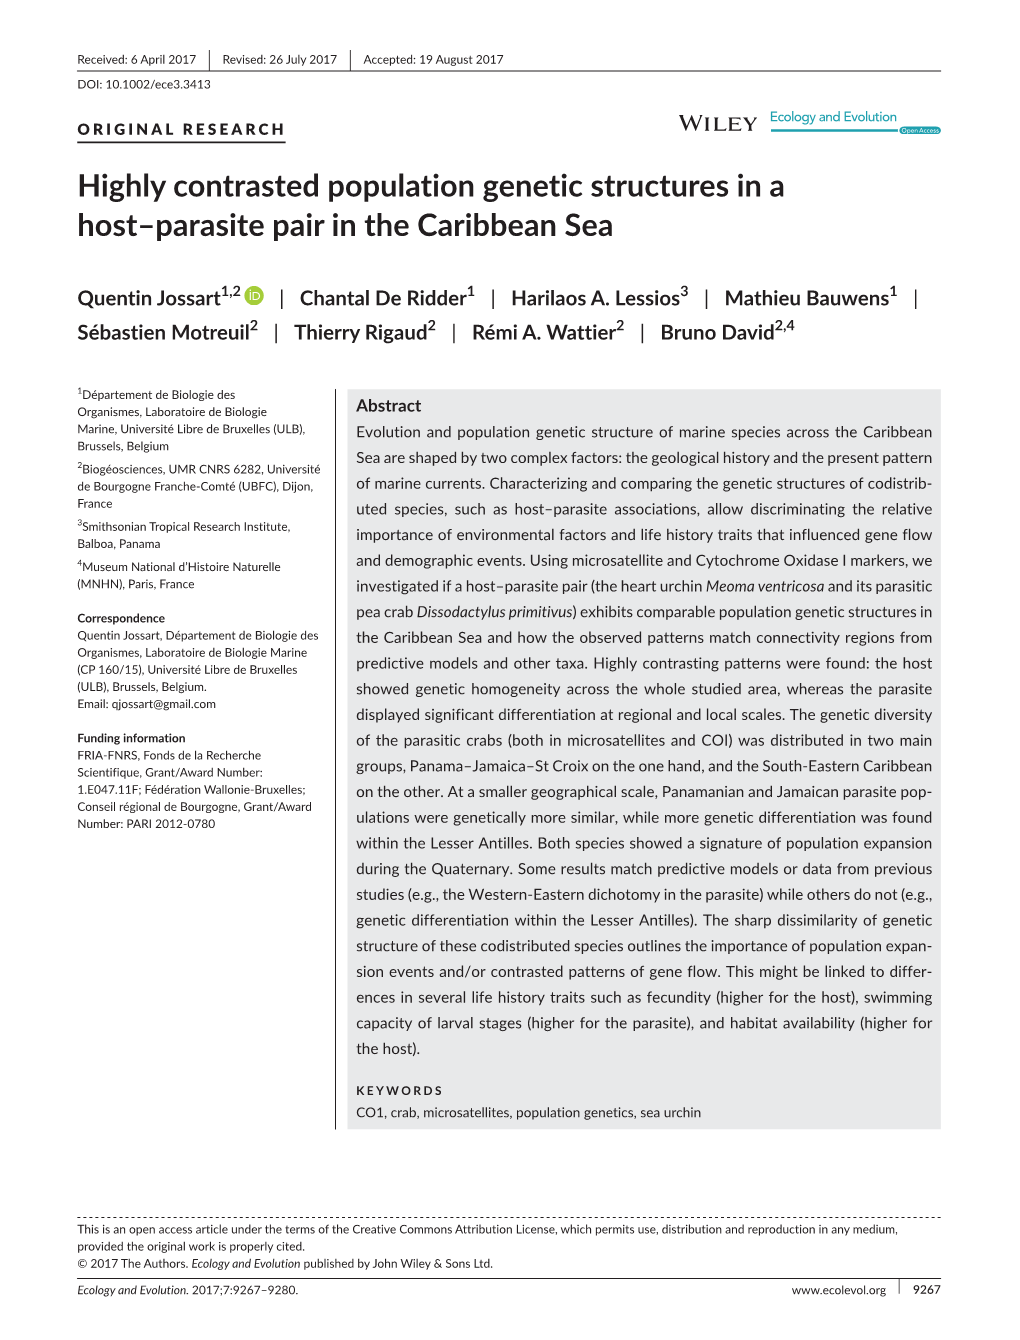 Highly Contrasted Population Genetic Structures in a Host&#X2013;Parasite Pair in the Caribbean